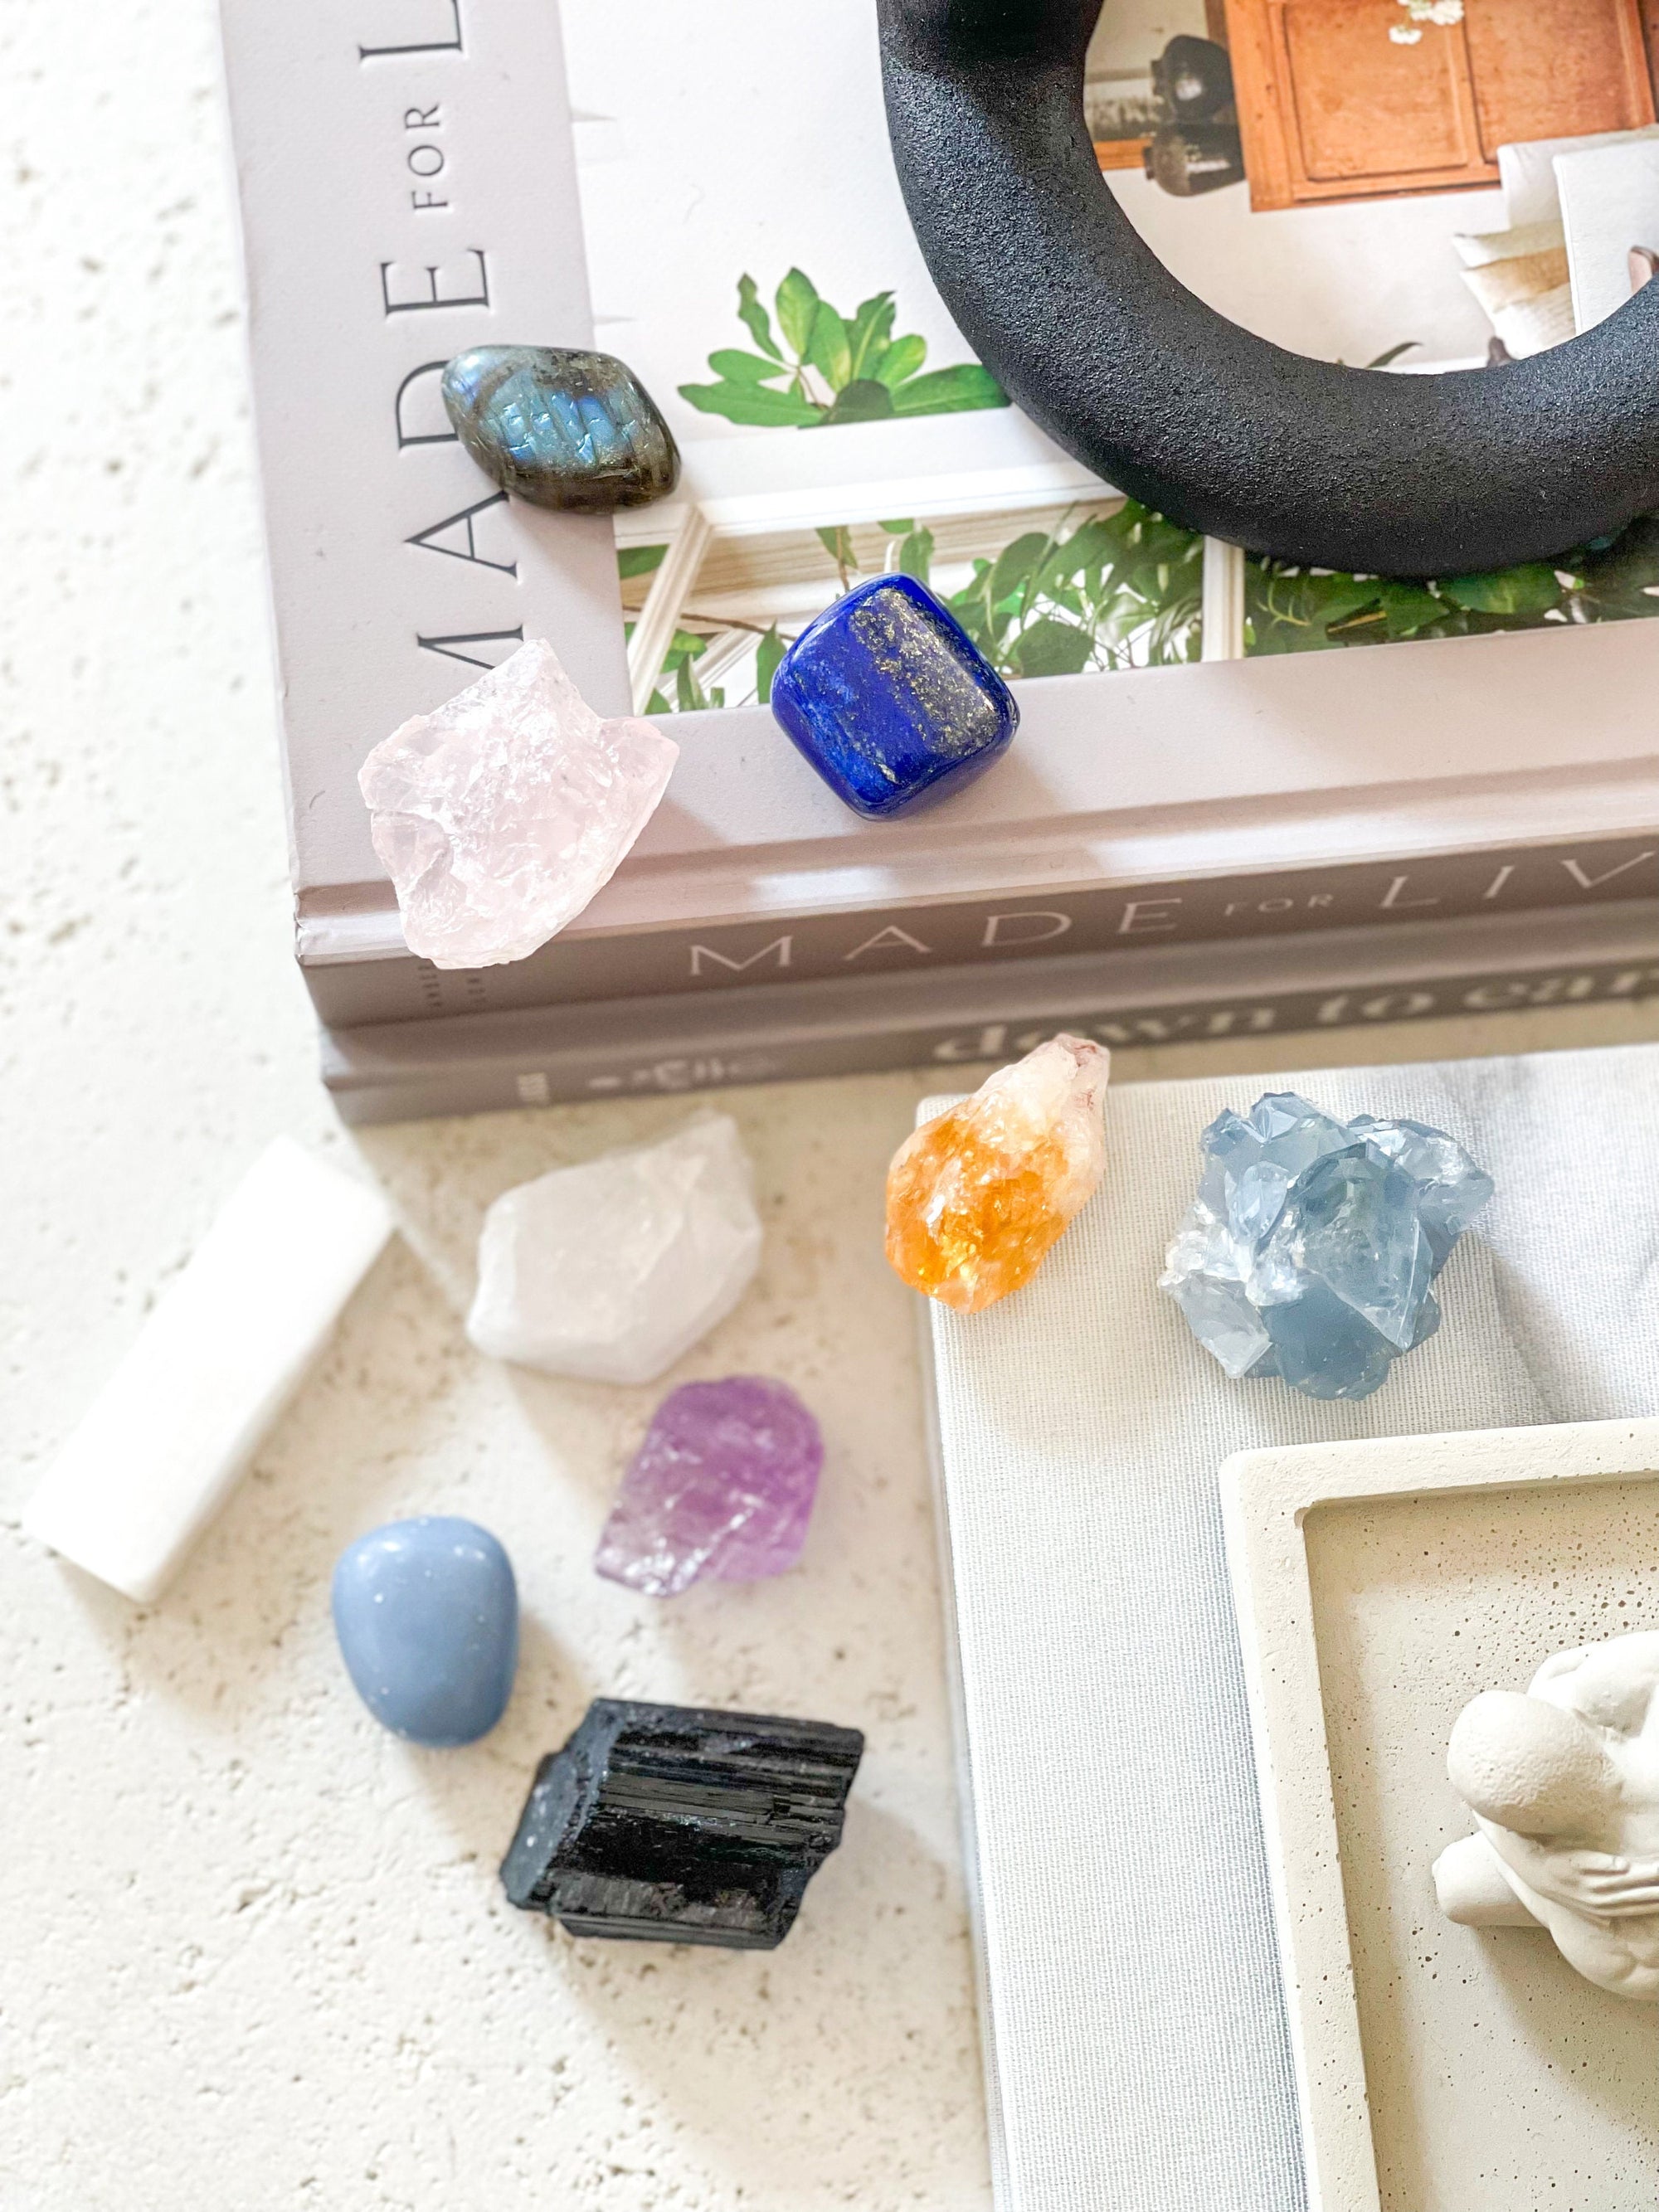 Ultimate Meditation Crystal Set: 10 Powerful Stones for Deep Relaxation, Spiritual Connection & Chakra Balancing - Cotton Pouch + Info Card